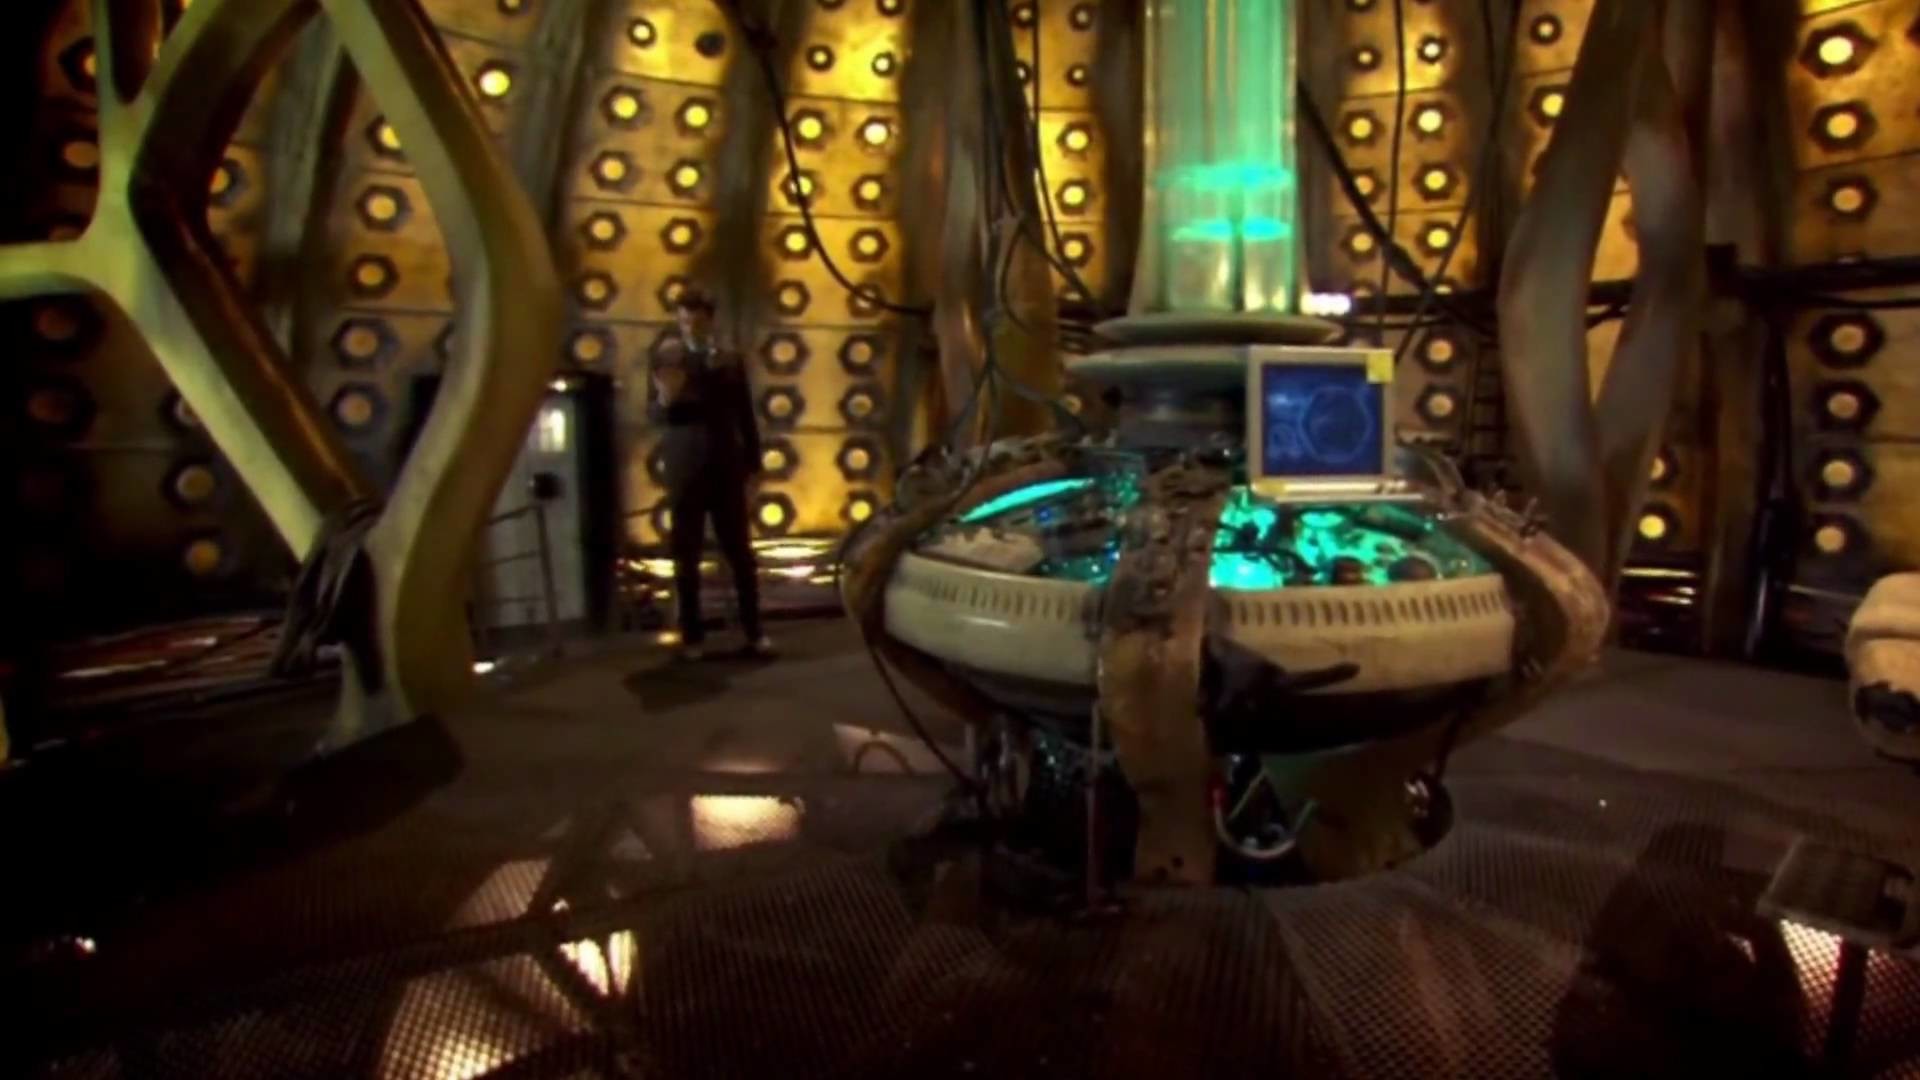 1920x1080 I used to look at the tardis interior for hours as a child